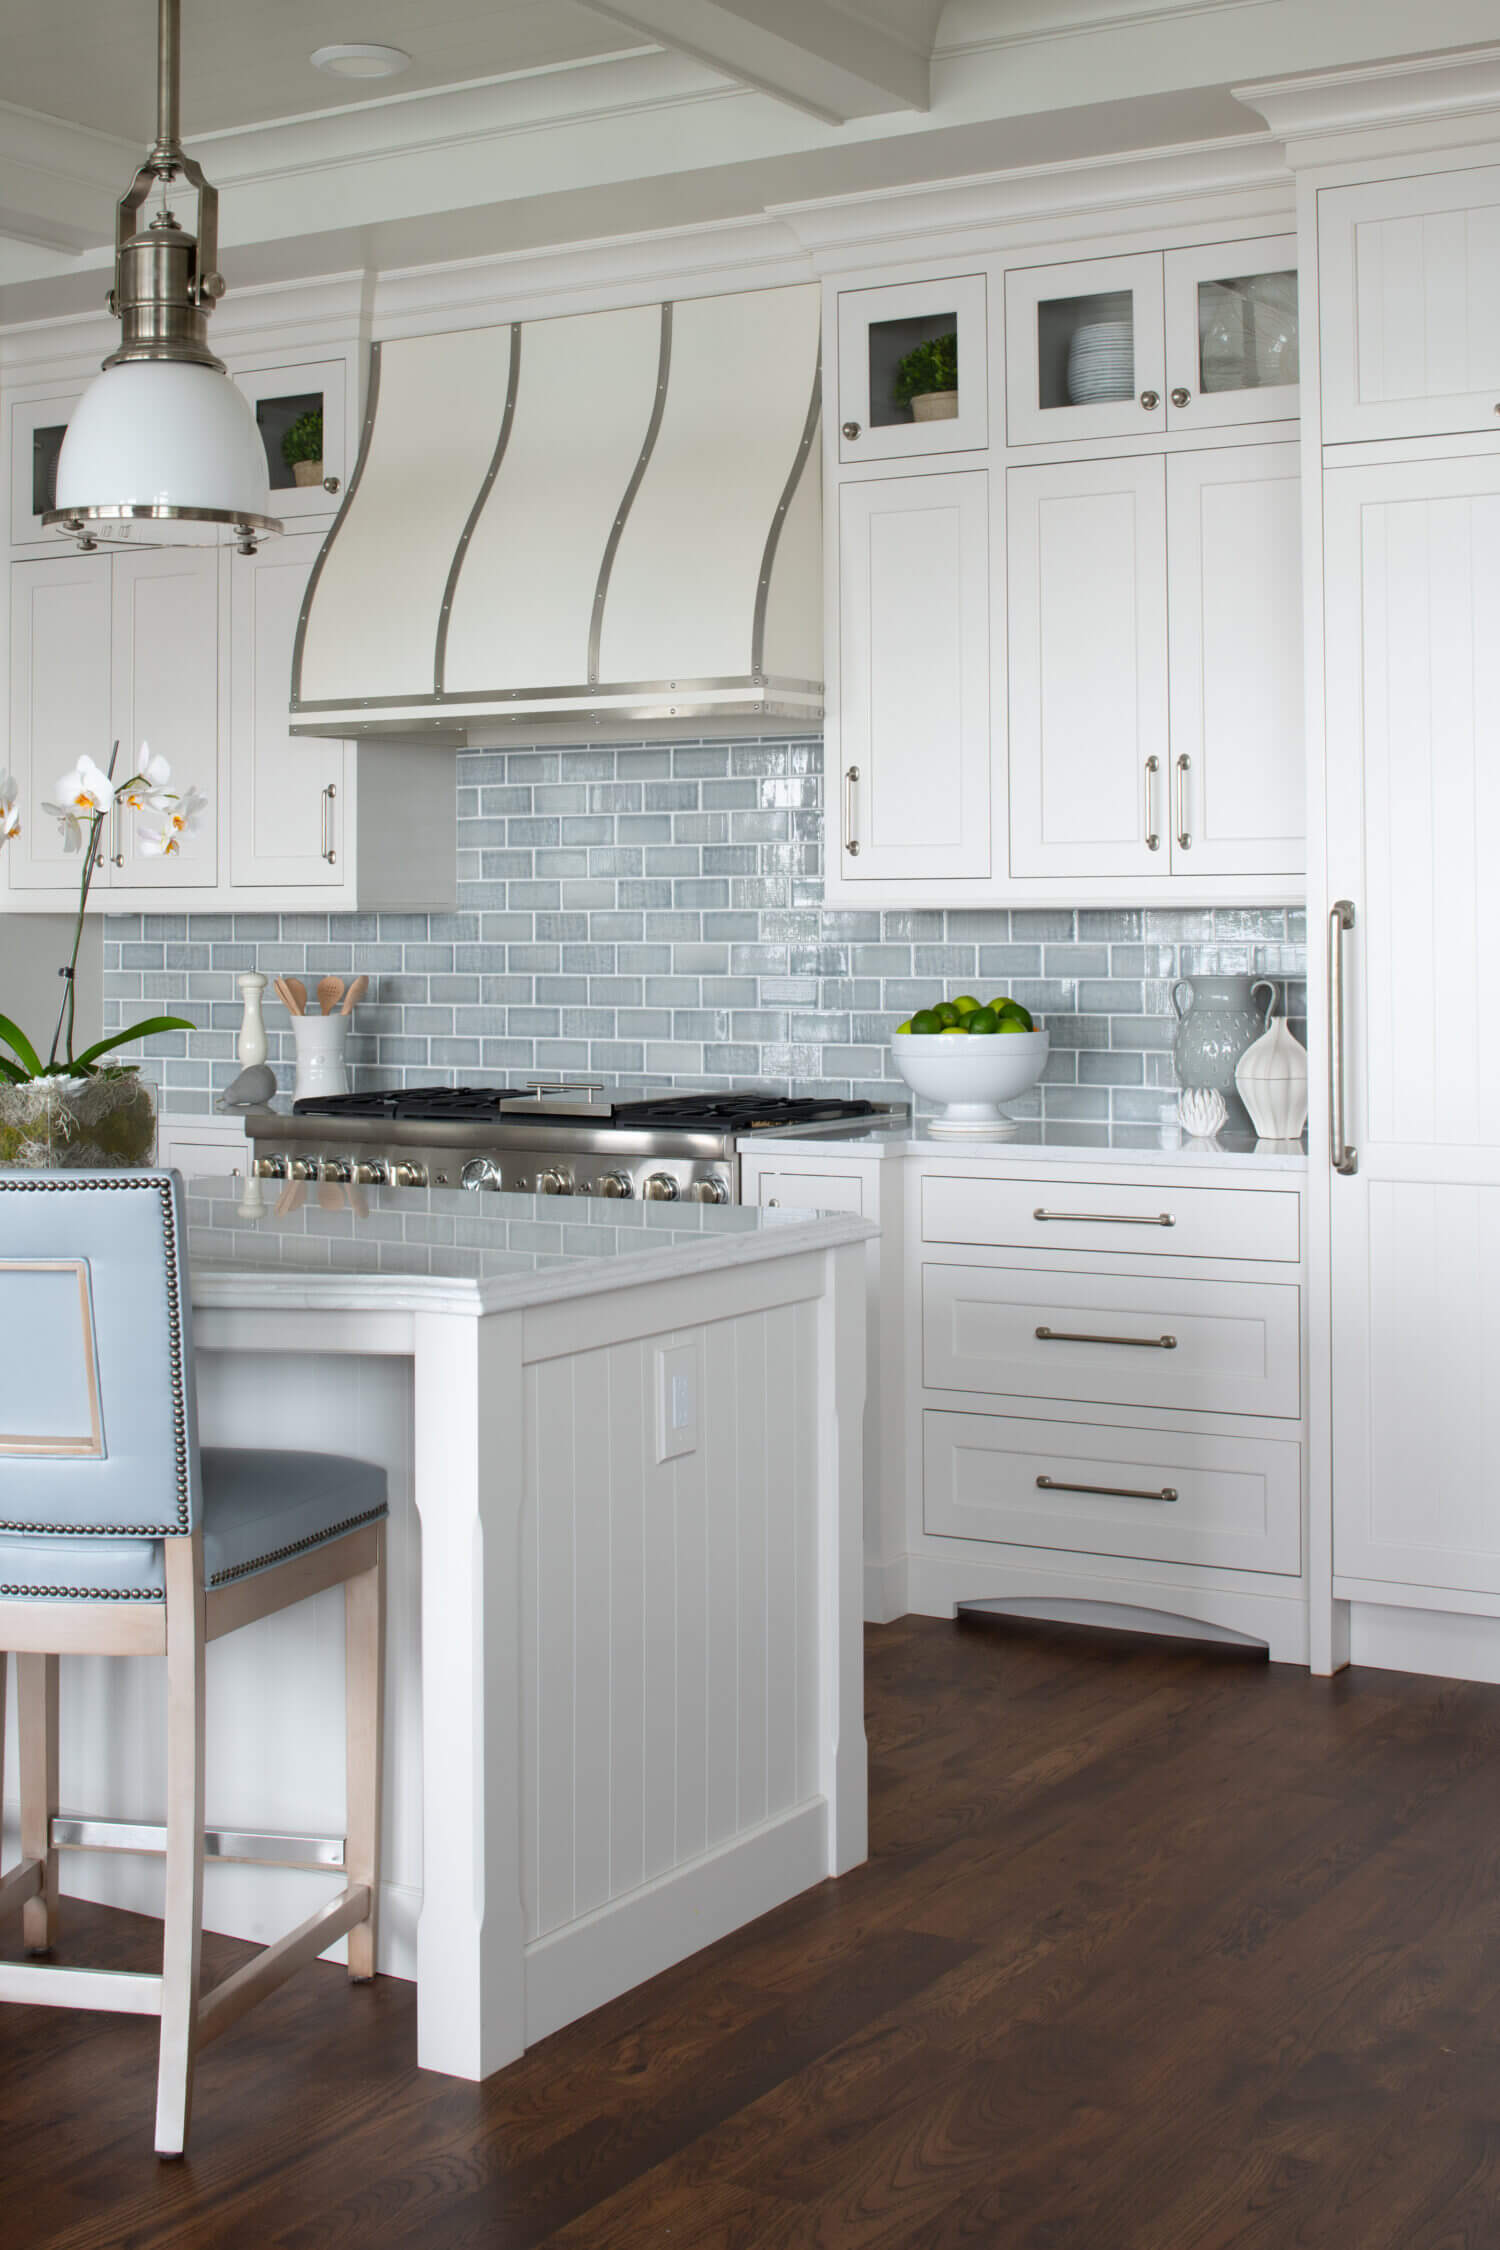 An East coast shingle styled kitchen with a symmetrical design using white painted inset cabinets and shiplap details at the end of the kitchen island.